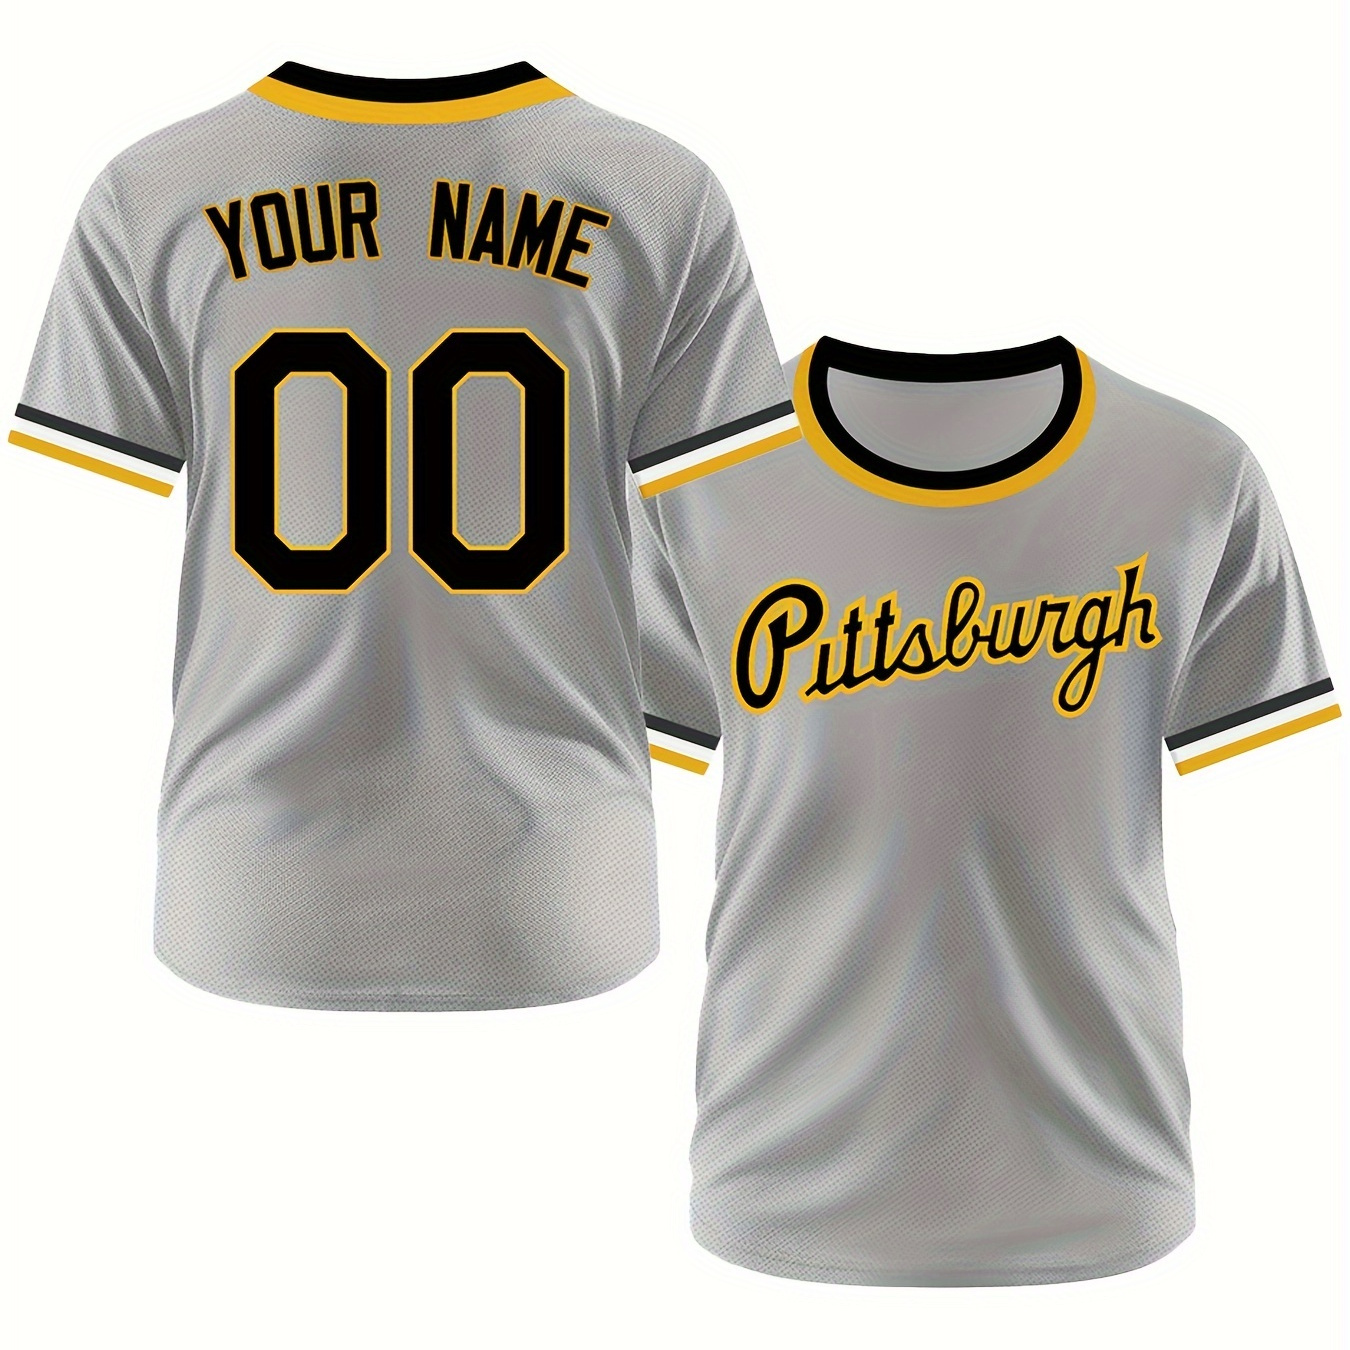 

Customized Name And Number Design, Men's Pittsburgh Embroidery Design Short Sleeve Loose Fit Round Neck Baseball Jersey, Sports Shirt For Team Training